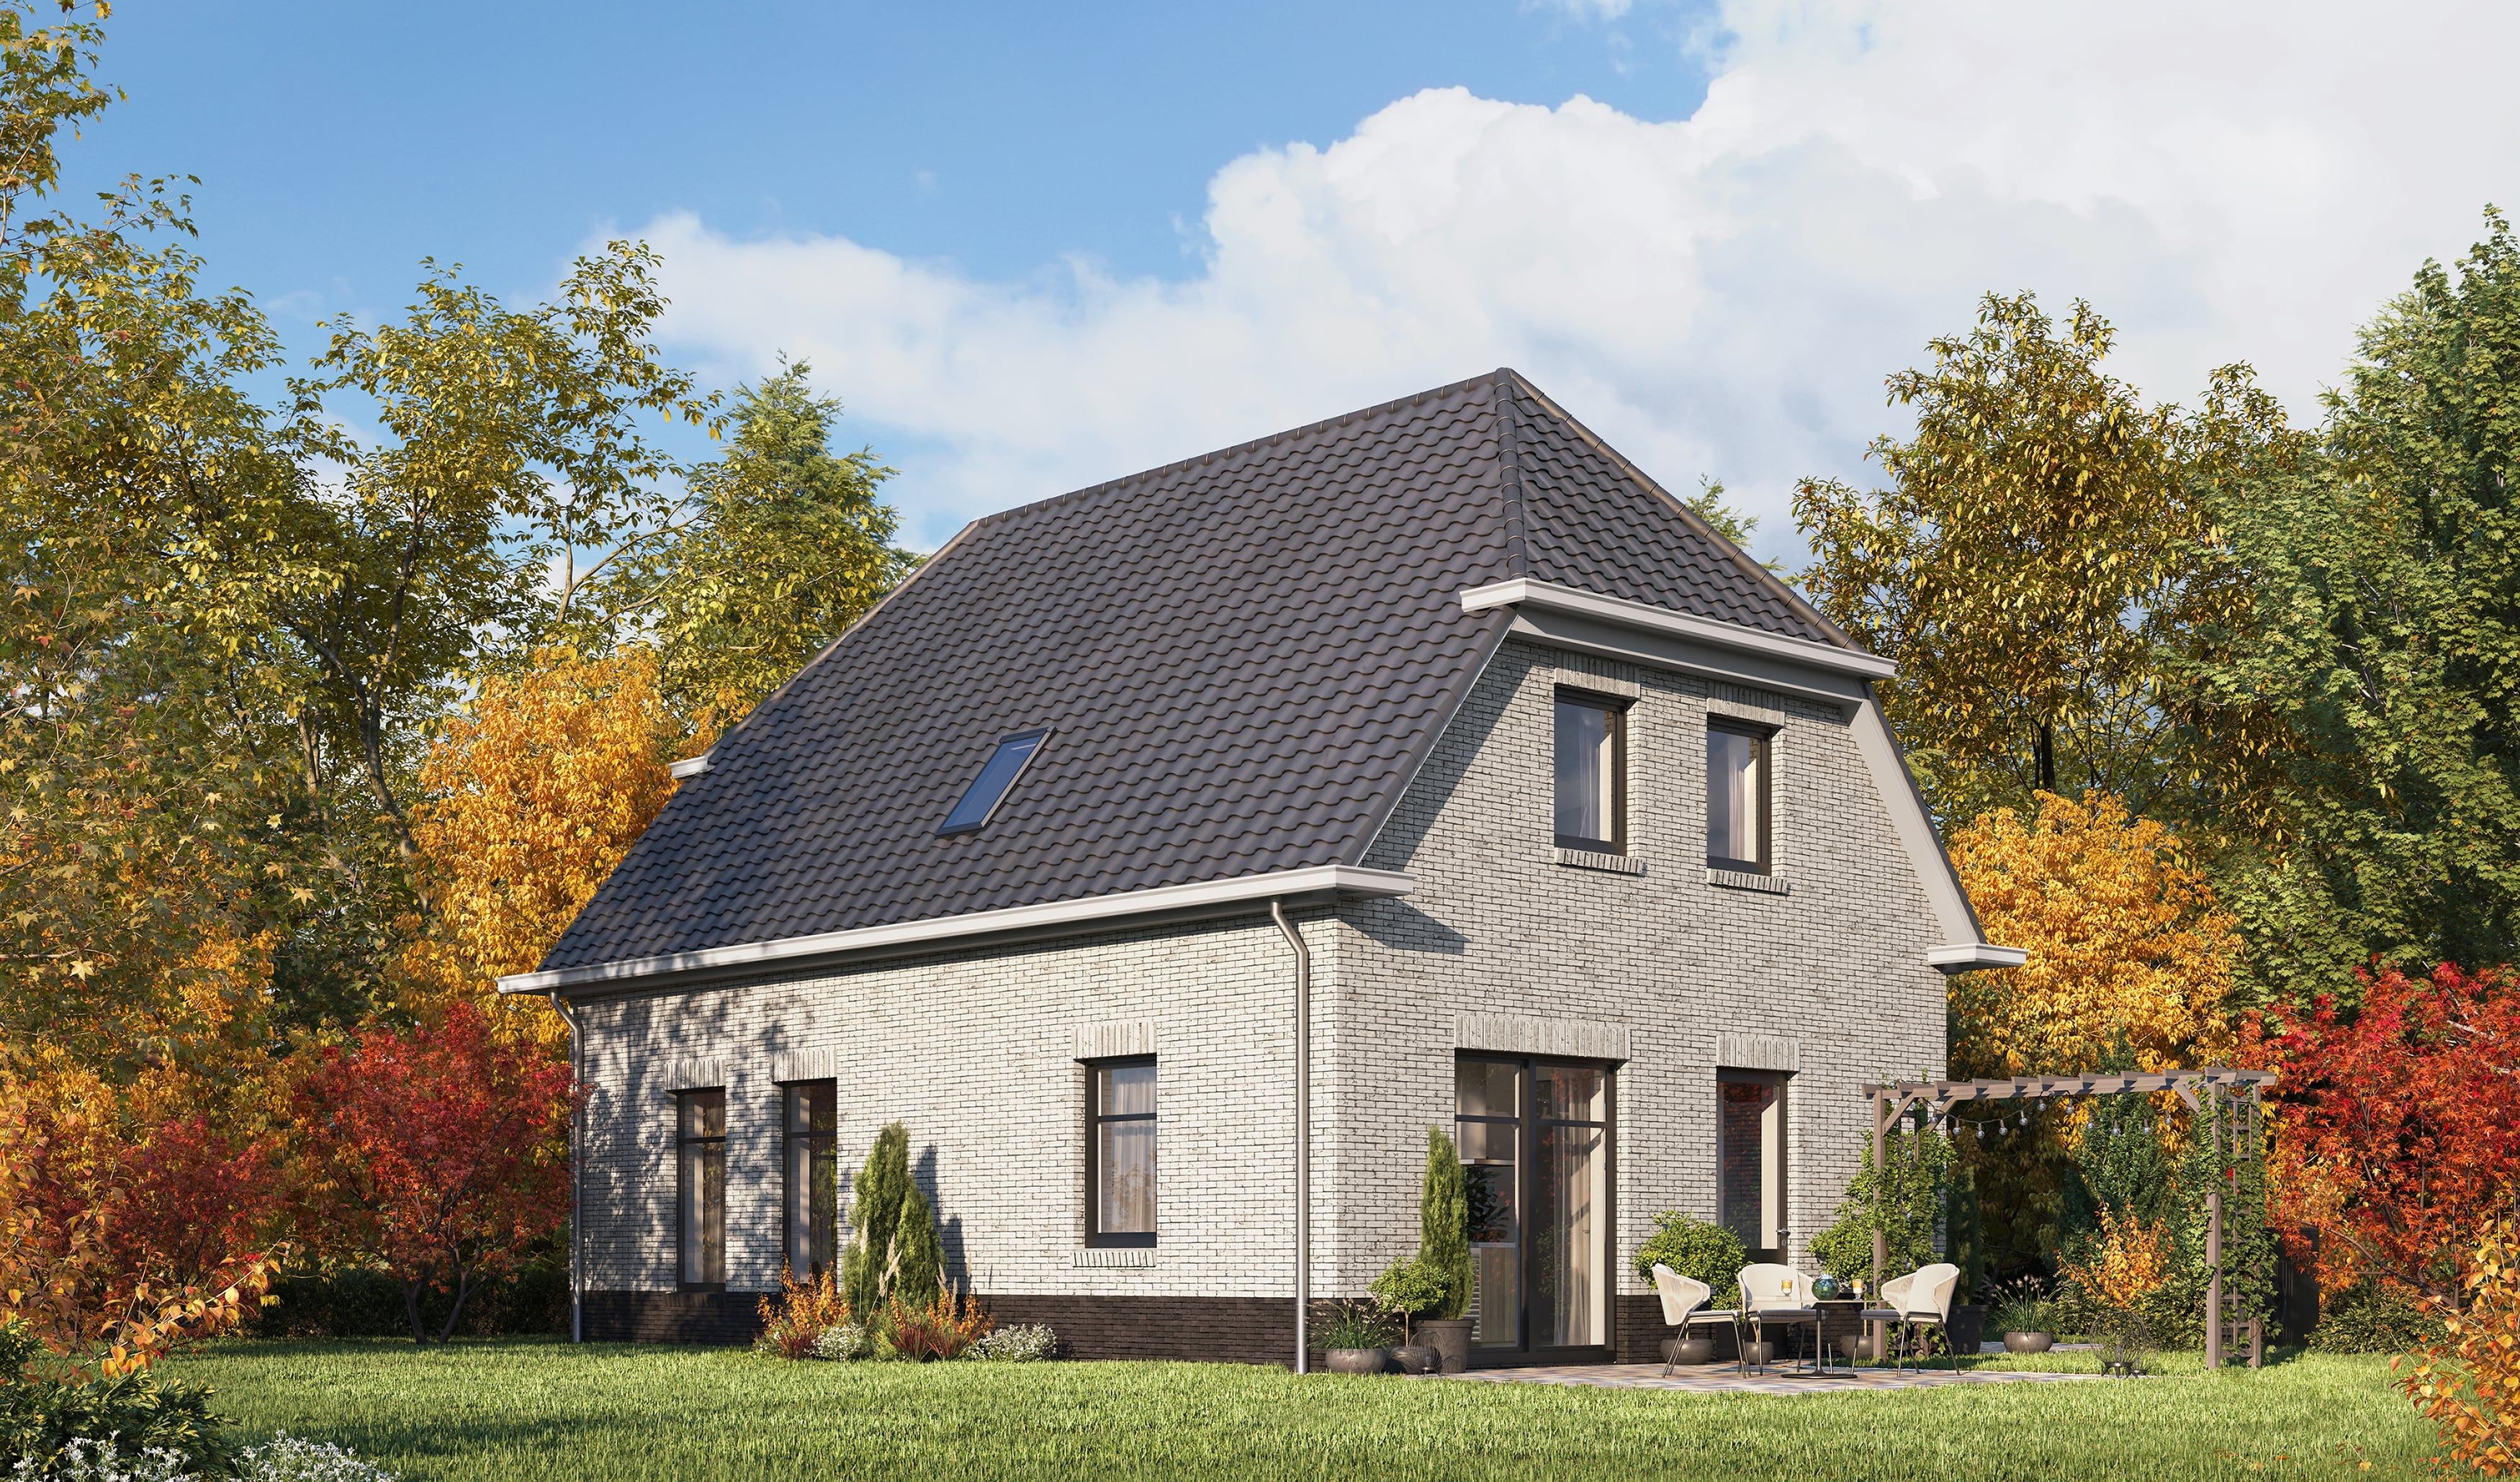 3D Exterior Visualization of Catalogue Family House with garden in Germany, Switzerland, Holland and Europe